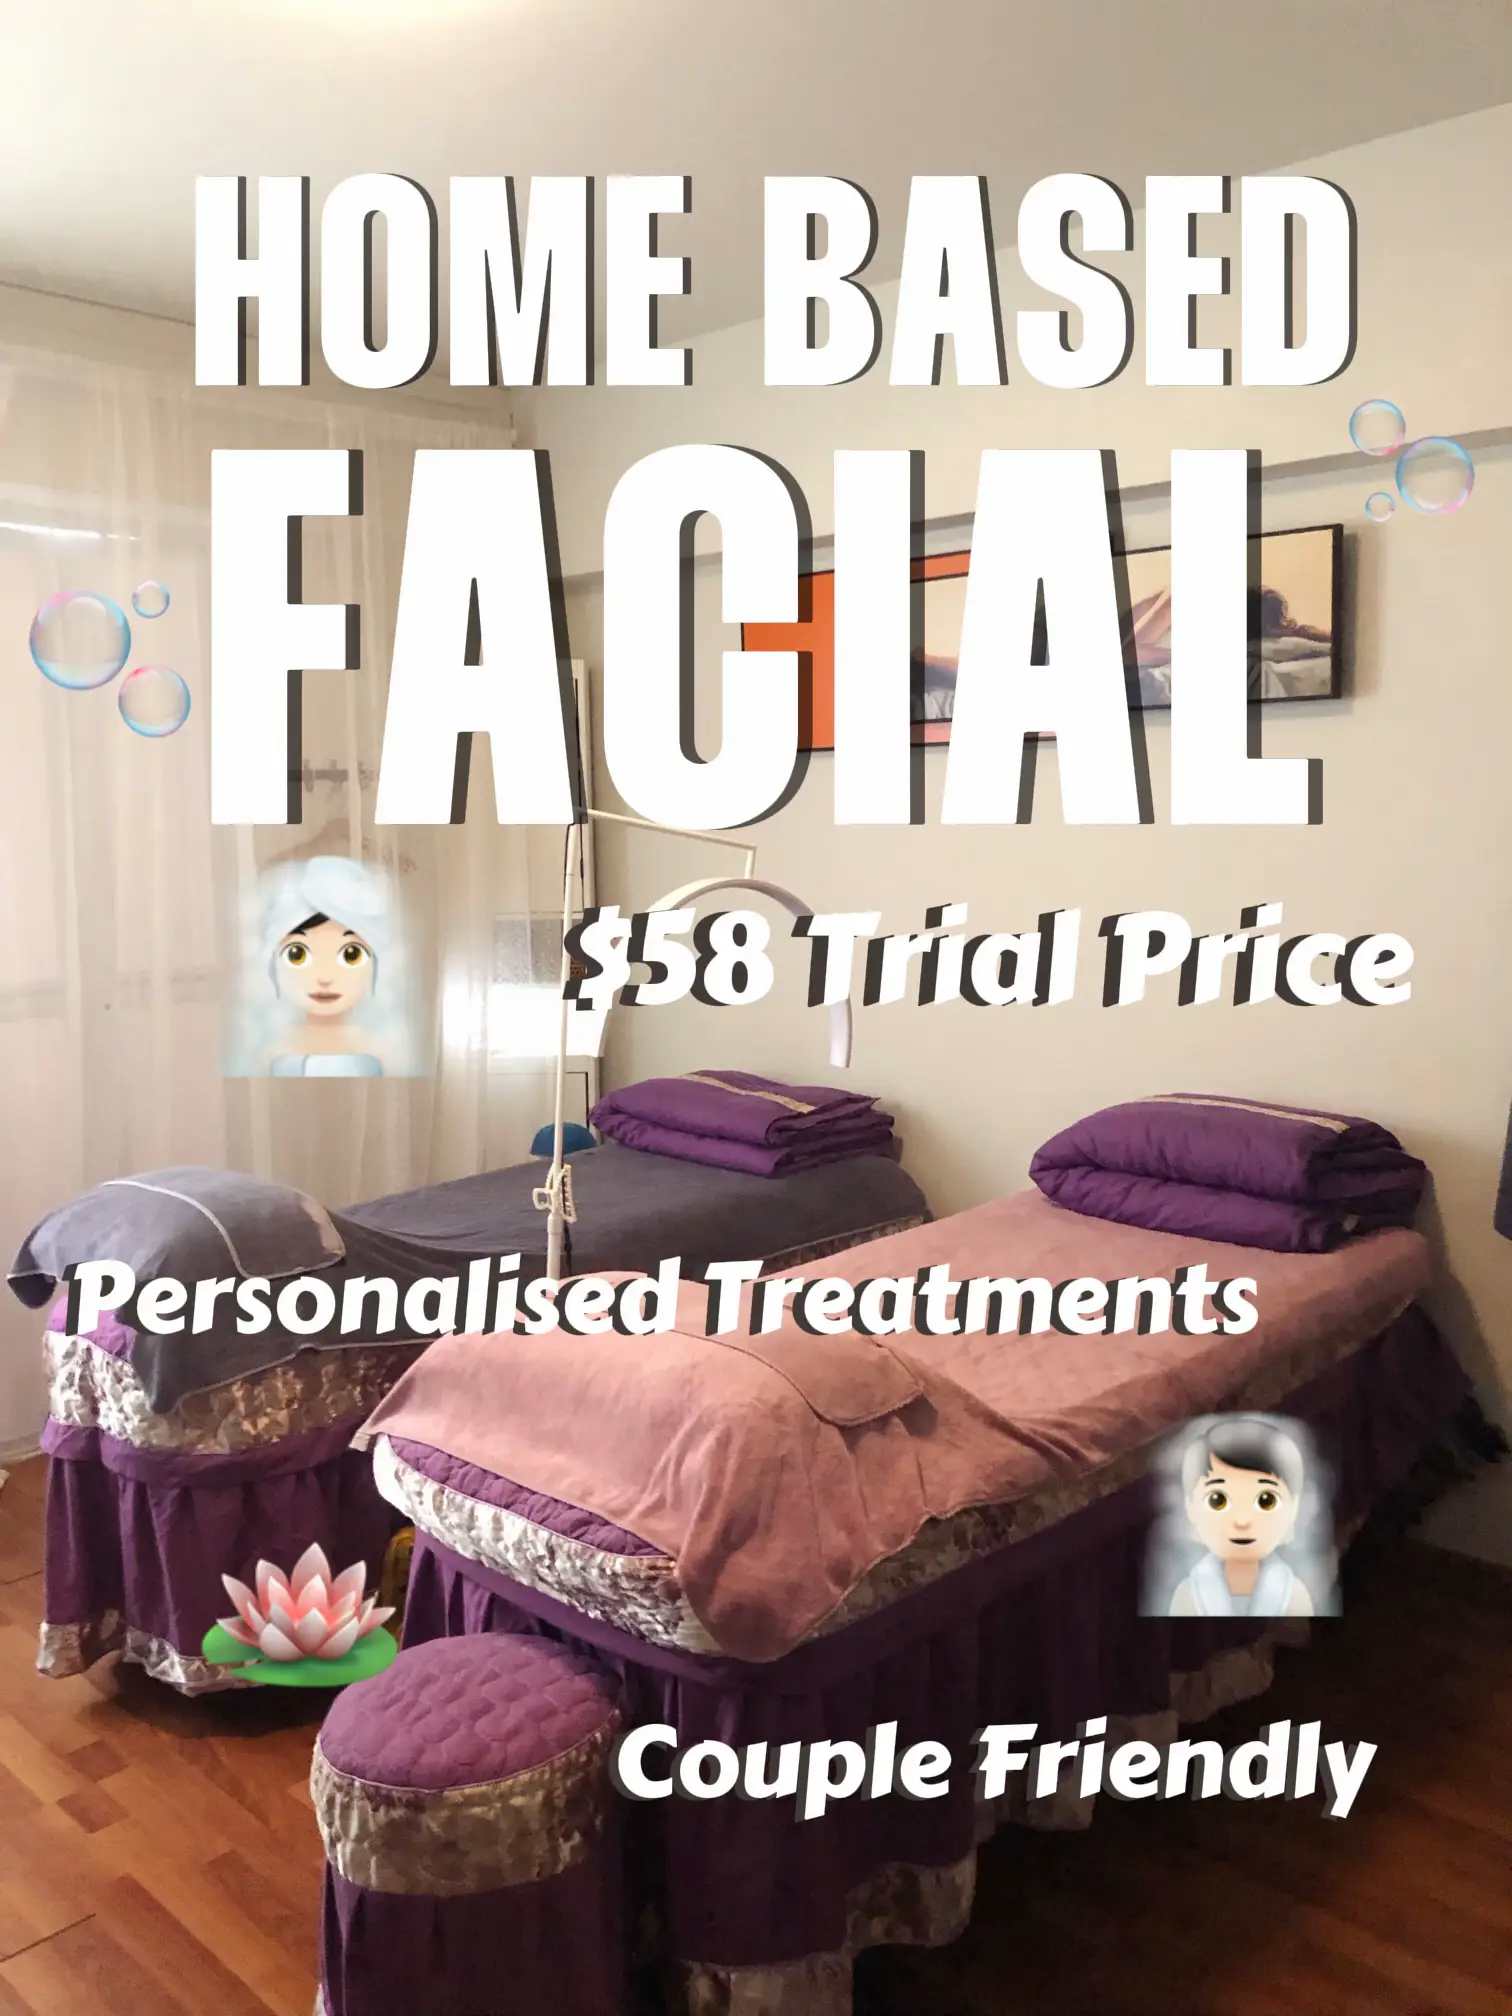 $58 FACIAL APPOINTMENT & NO HARDSELLING 🧖🏻‍♀️🧖🏻‼️ 's images(0)